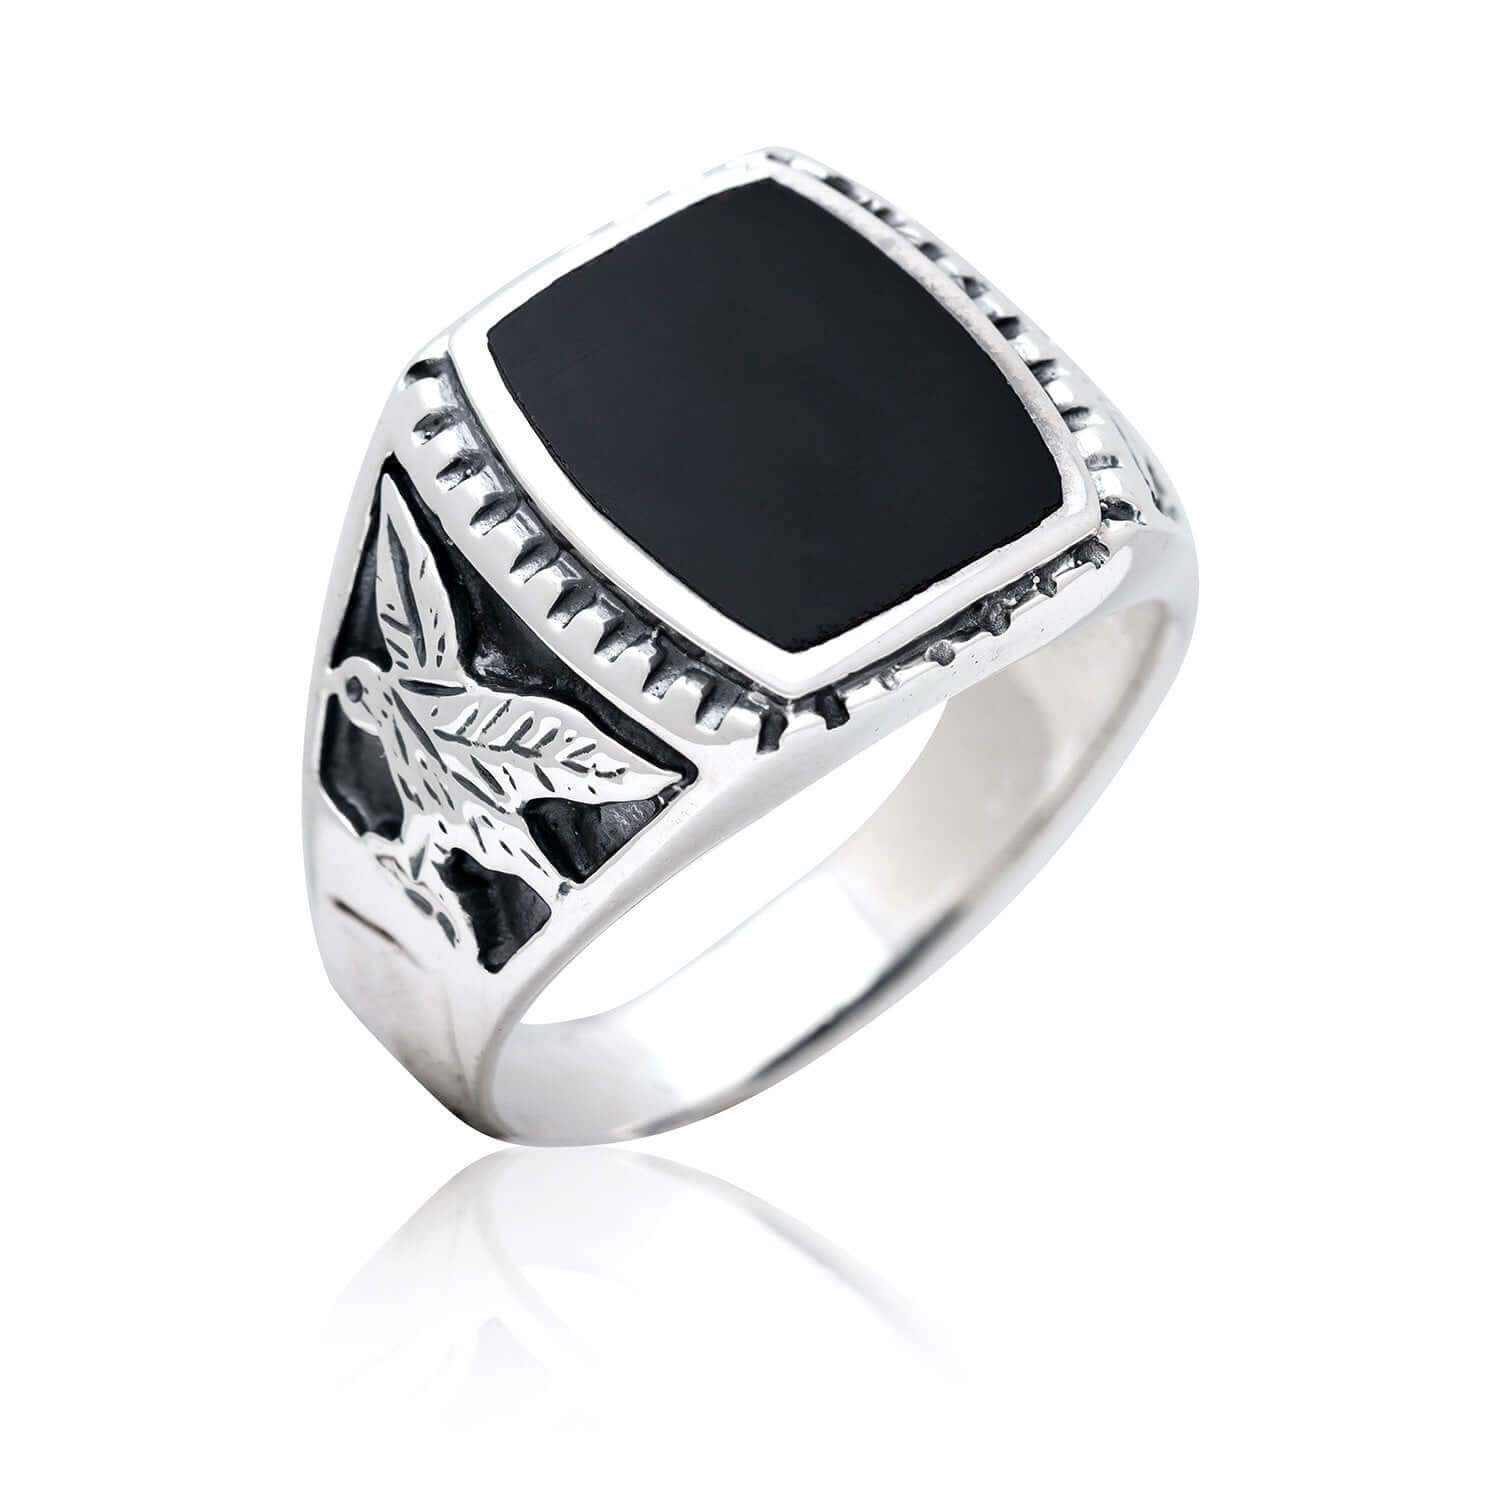 Men S Jewelry Details About a Black Onyx Stone Heavy 925 Sterling Silver Mens Mans Ring Usa Jewelry Watches